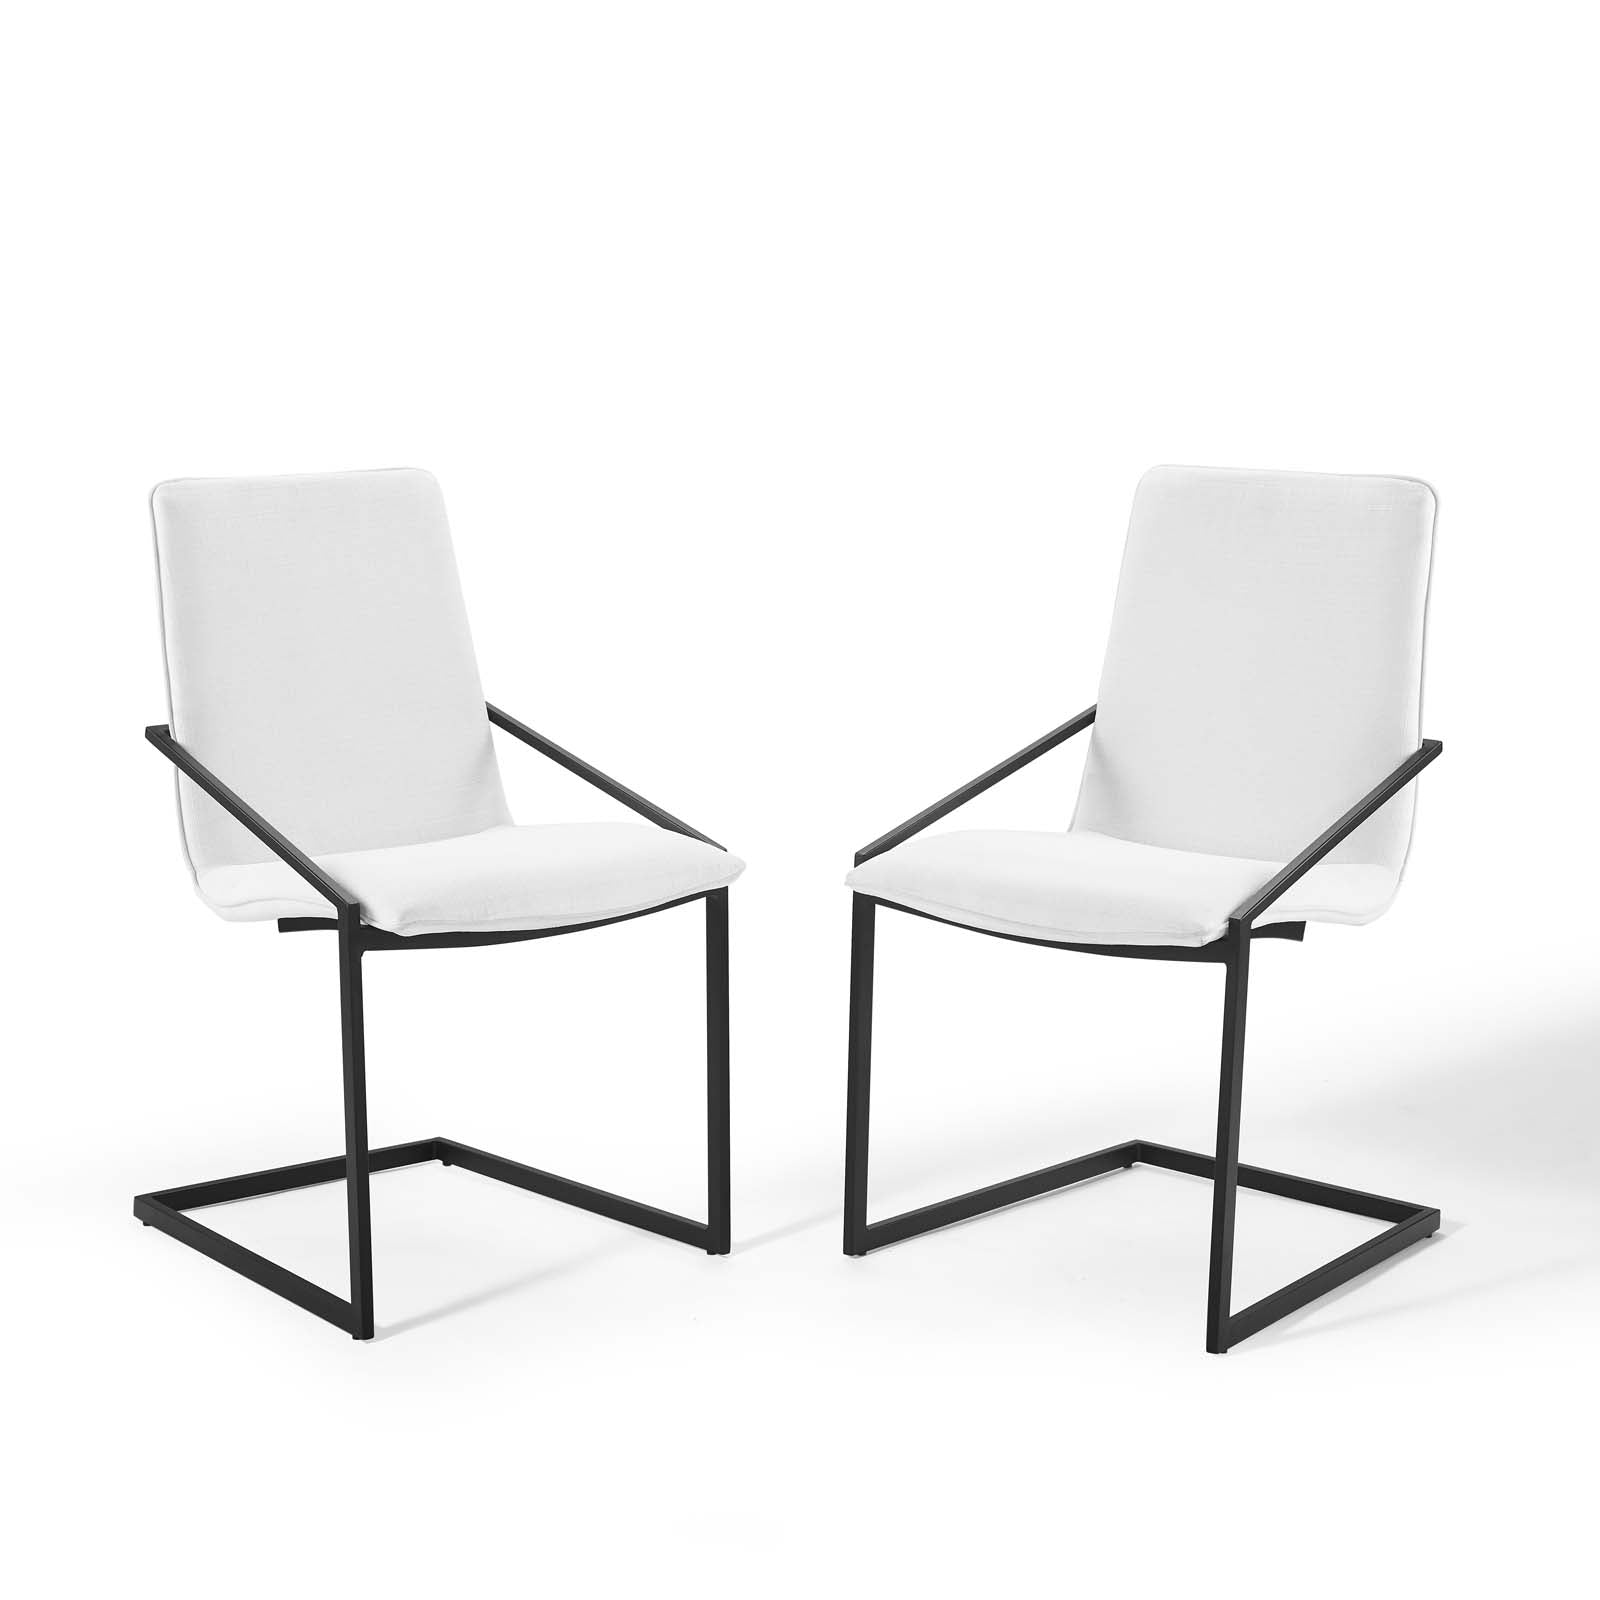 Modway Dining Chairs - Pitch Dining Armchair Upholstered Fabric Black White (Set of 2)